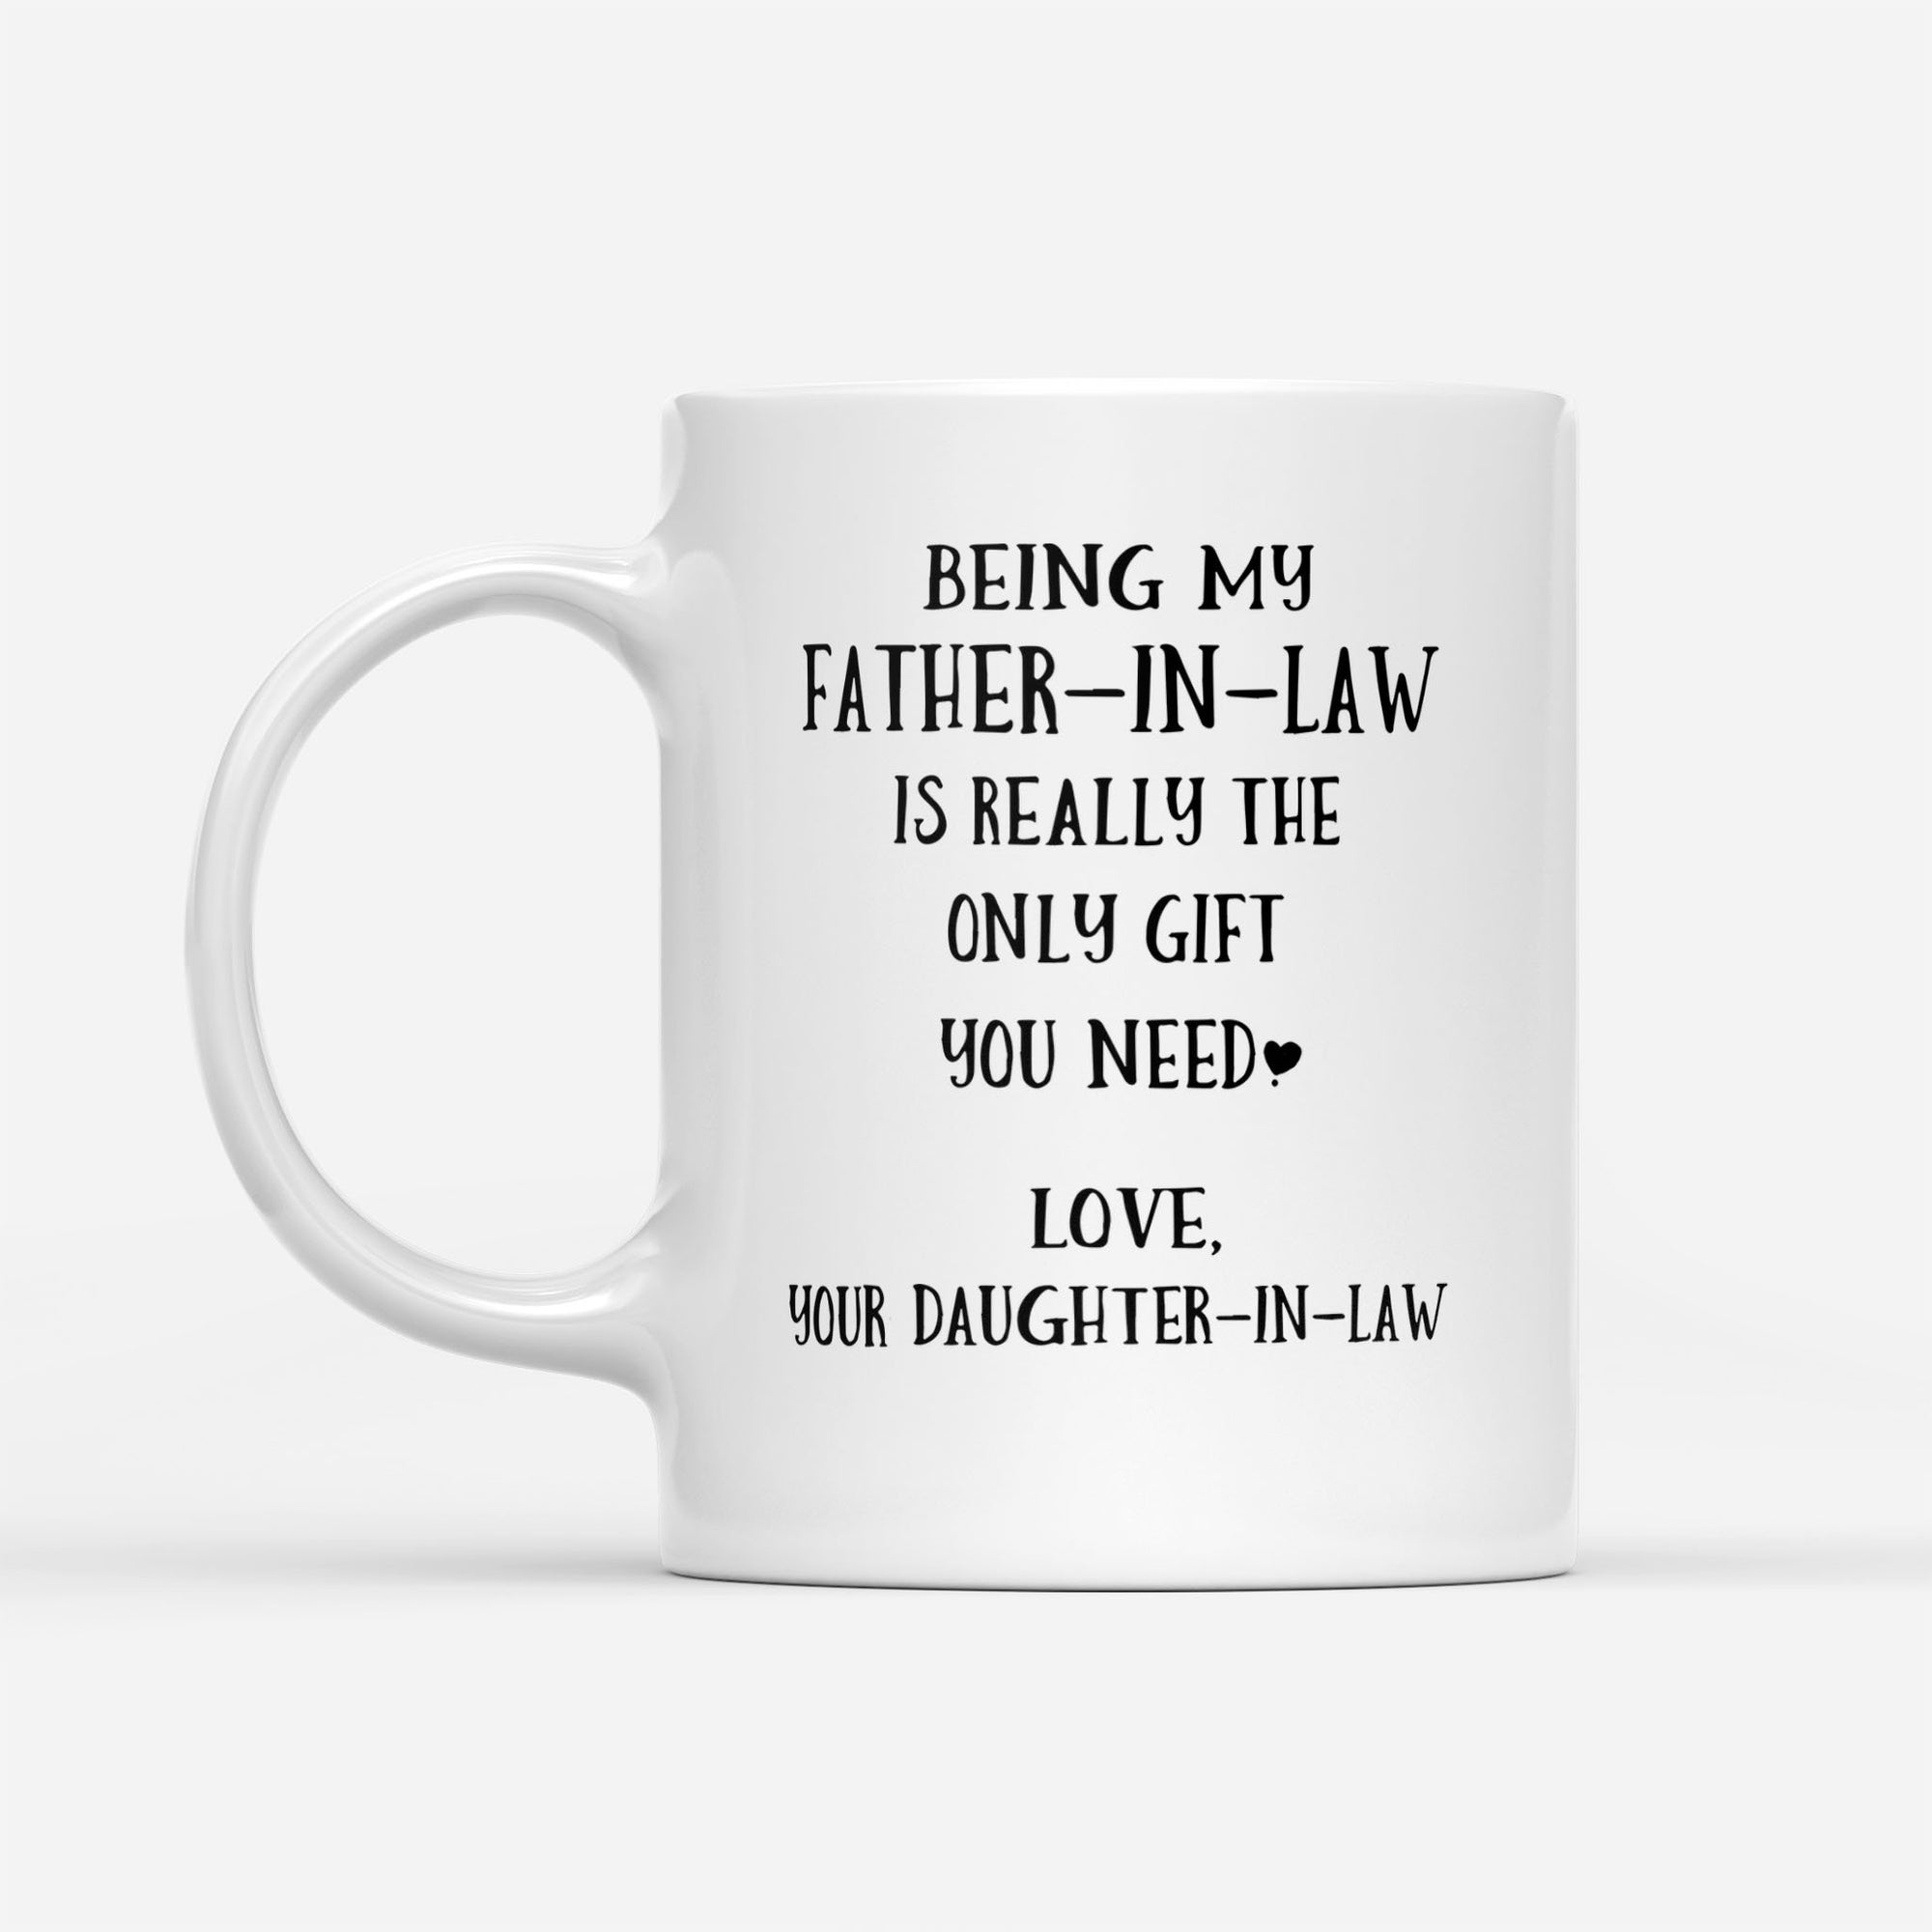 Dad And Daughter Son Daddy You Are Roarsome Funny Personalized Mug - Vista  Stars - Personalized gifts for the loved ones